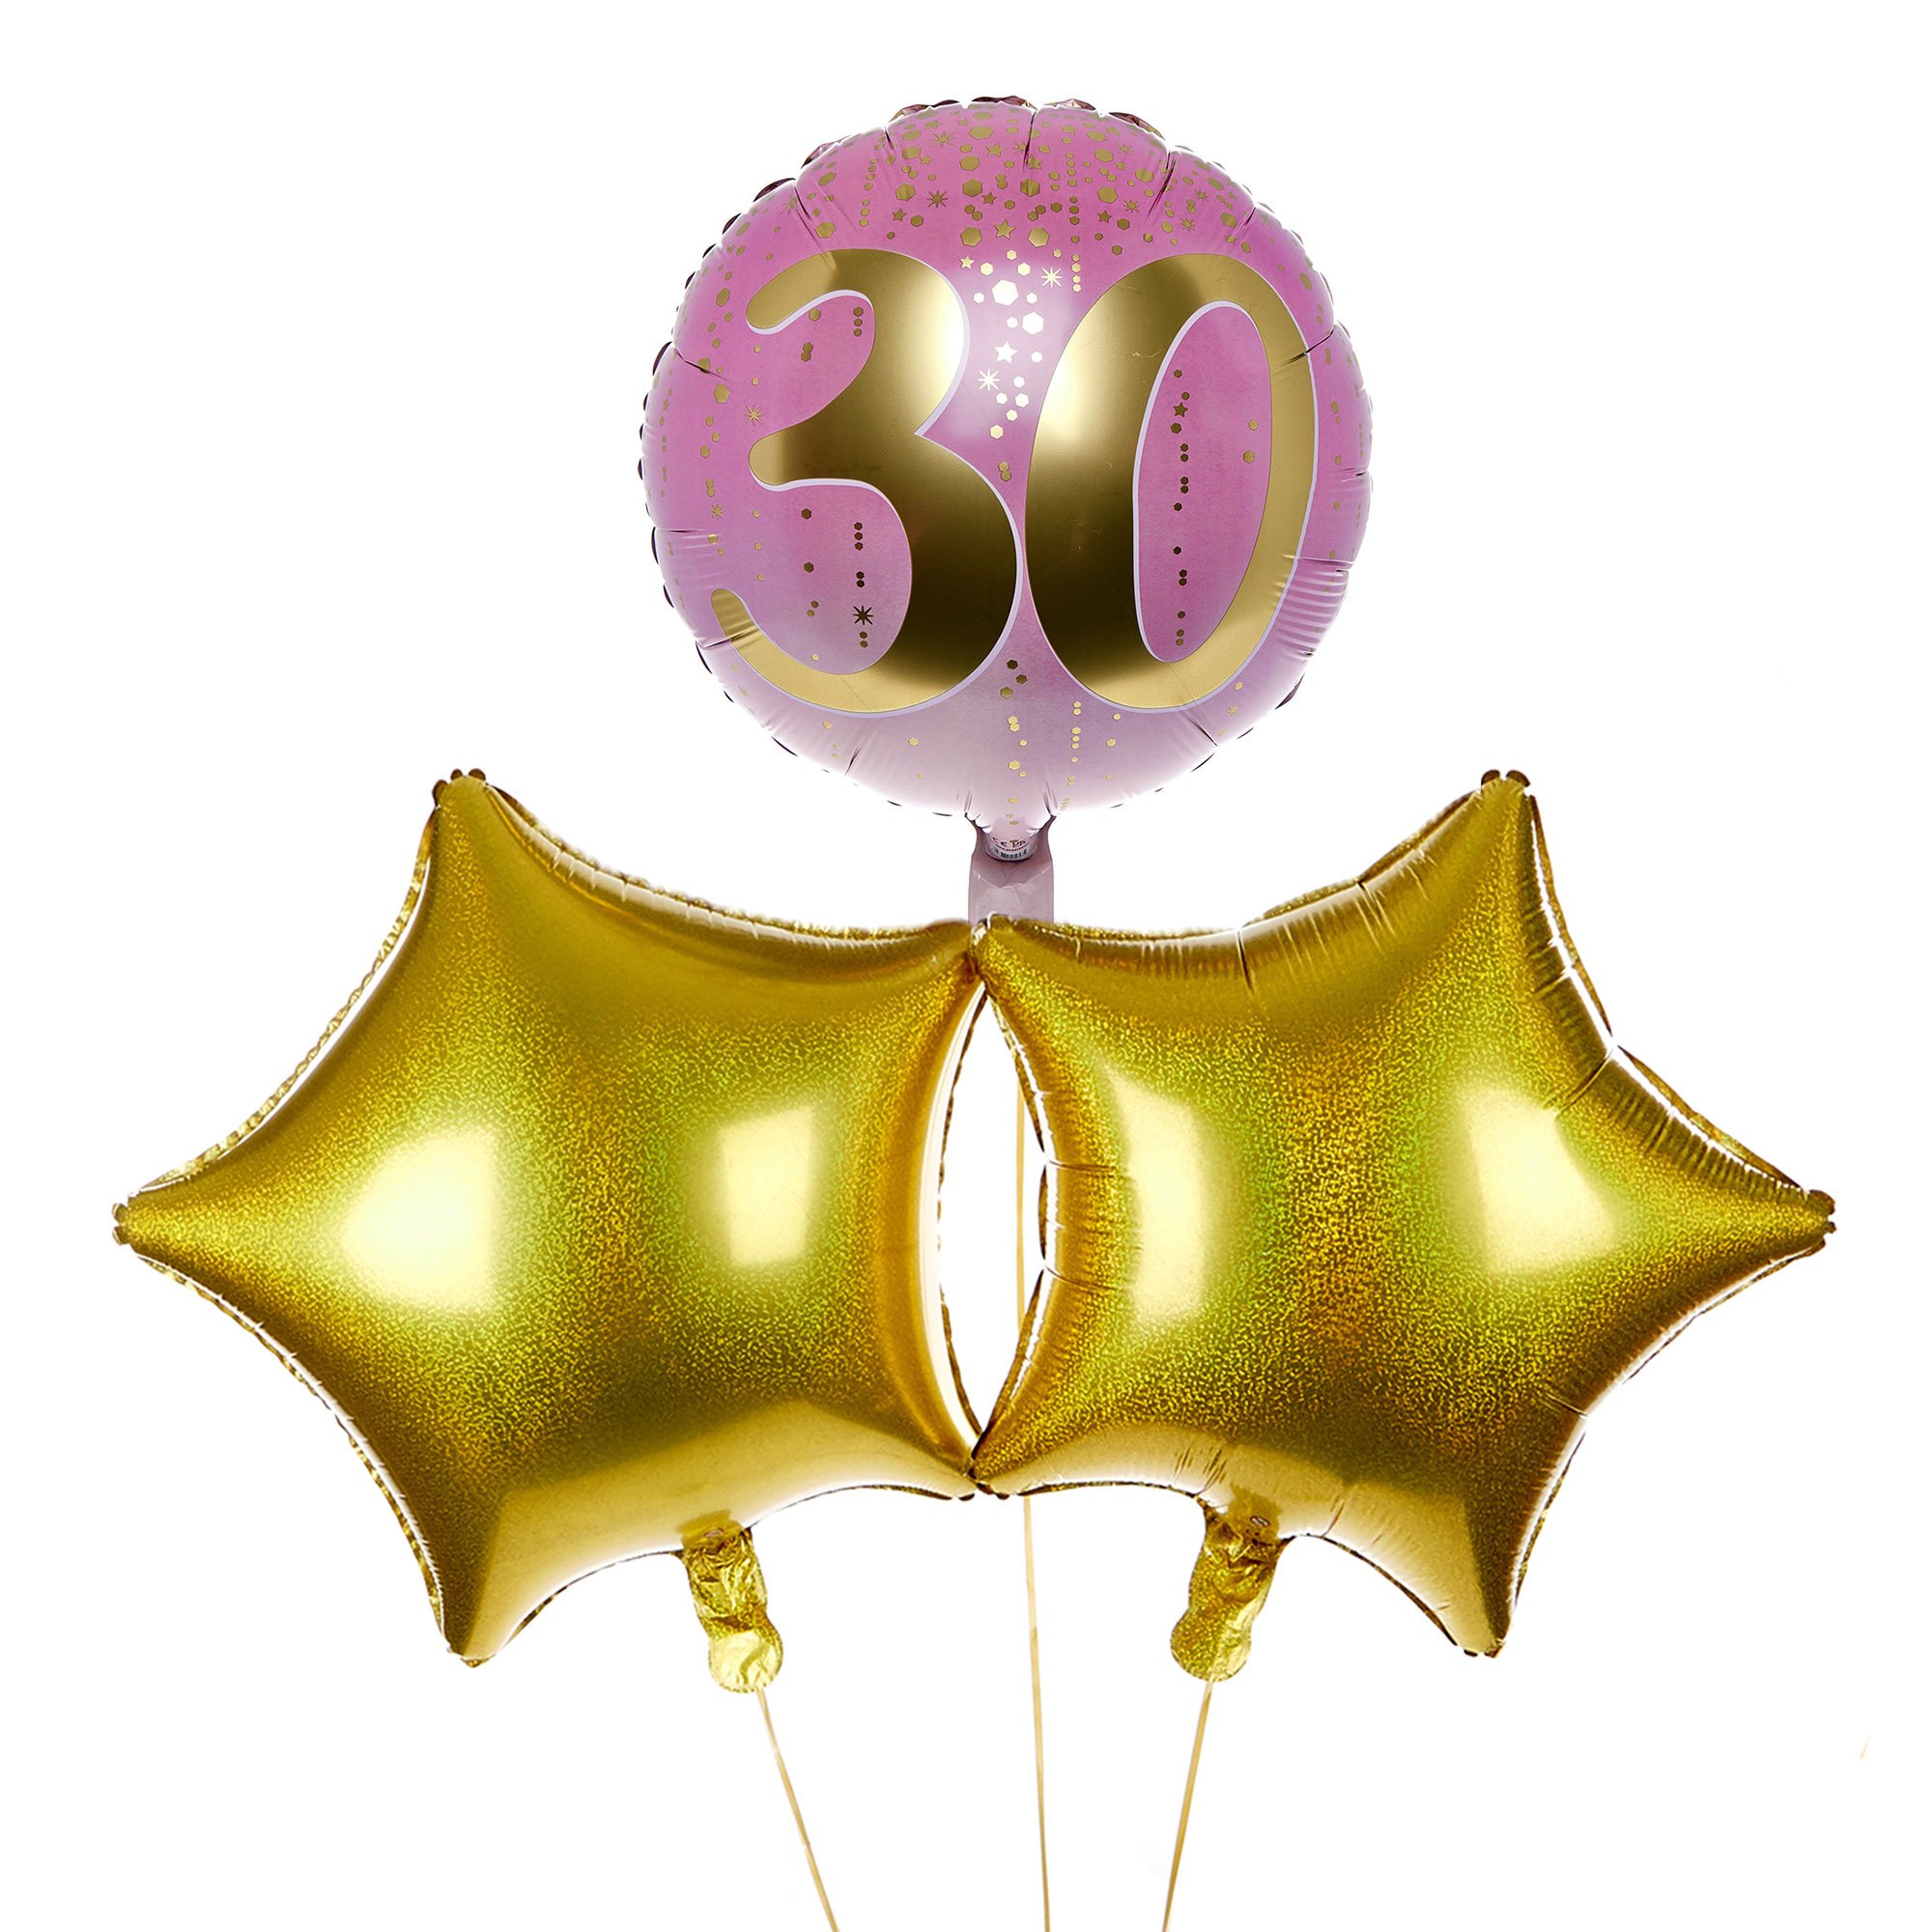 Pink & Gold 30th Birthday Balloon Bouquet - DELIVERED INFLATED!